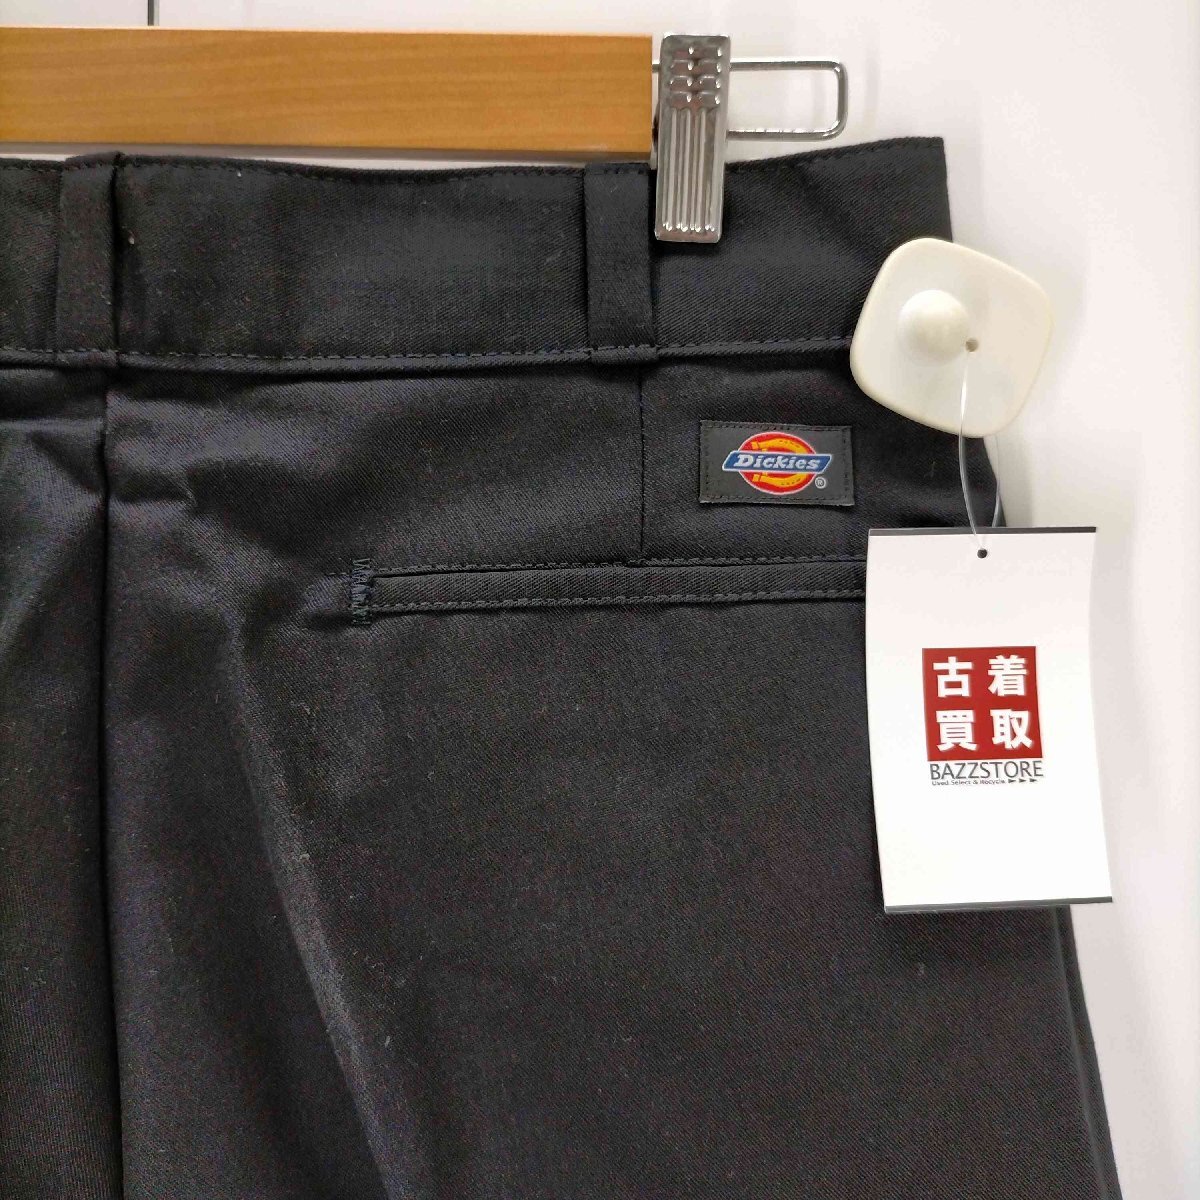 Dickies(ディッキーズ) RELAXED FIT ワーク ハーフパンツ メンズ US：32-33 中古 古着 0144_画像5